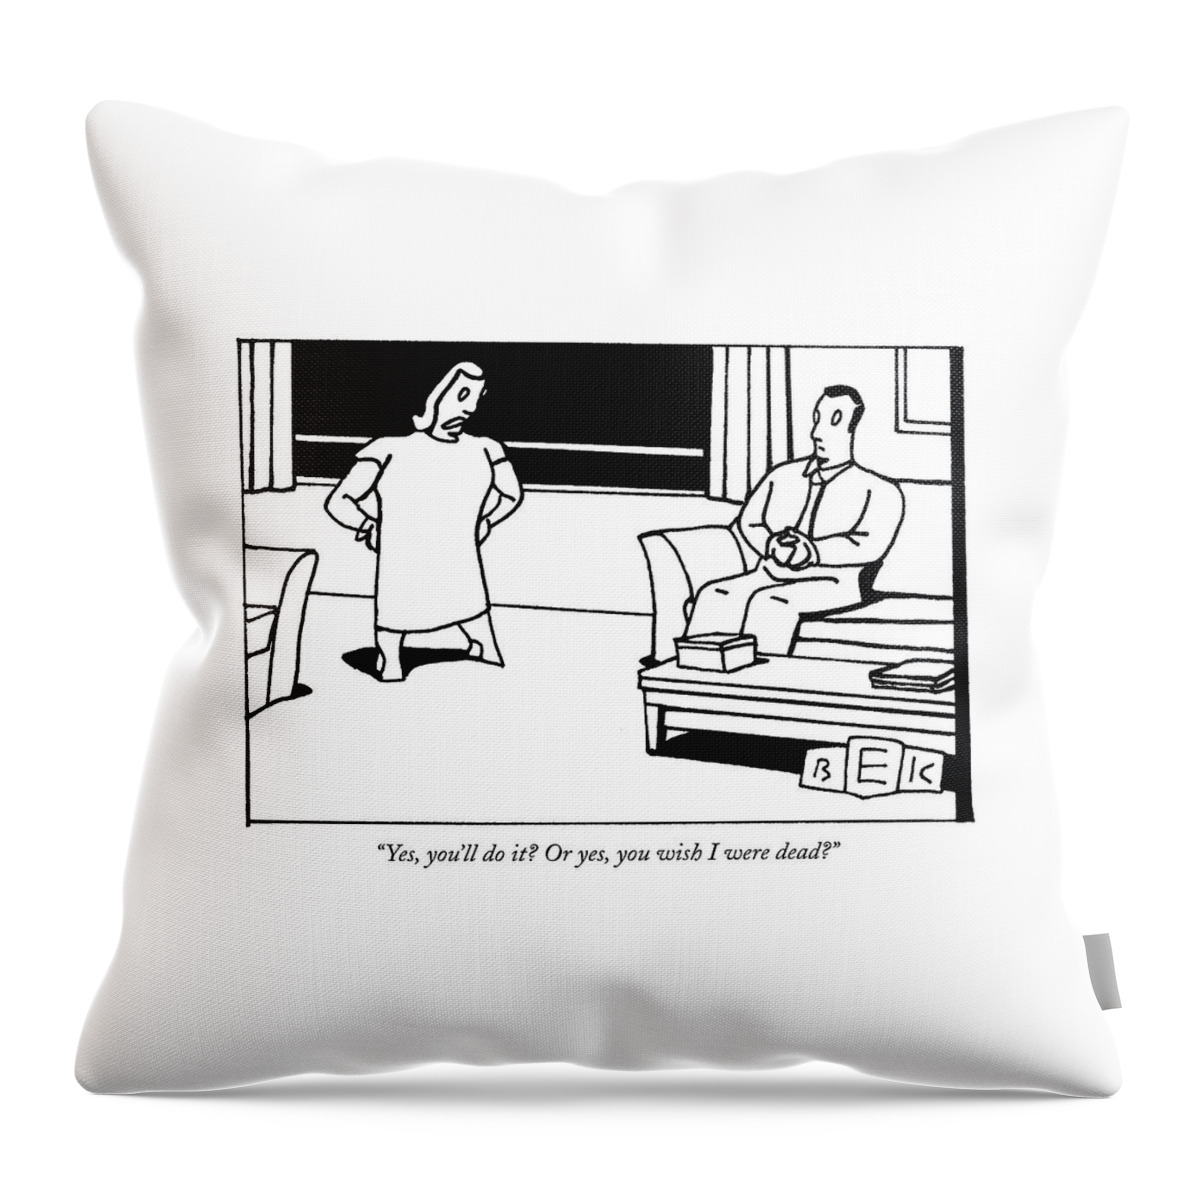 Yes, You'll Do It? Or Yes, You Wish I Were Dead? Throw Pillow